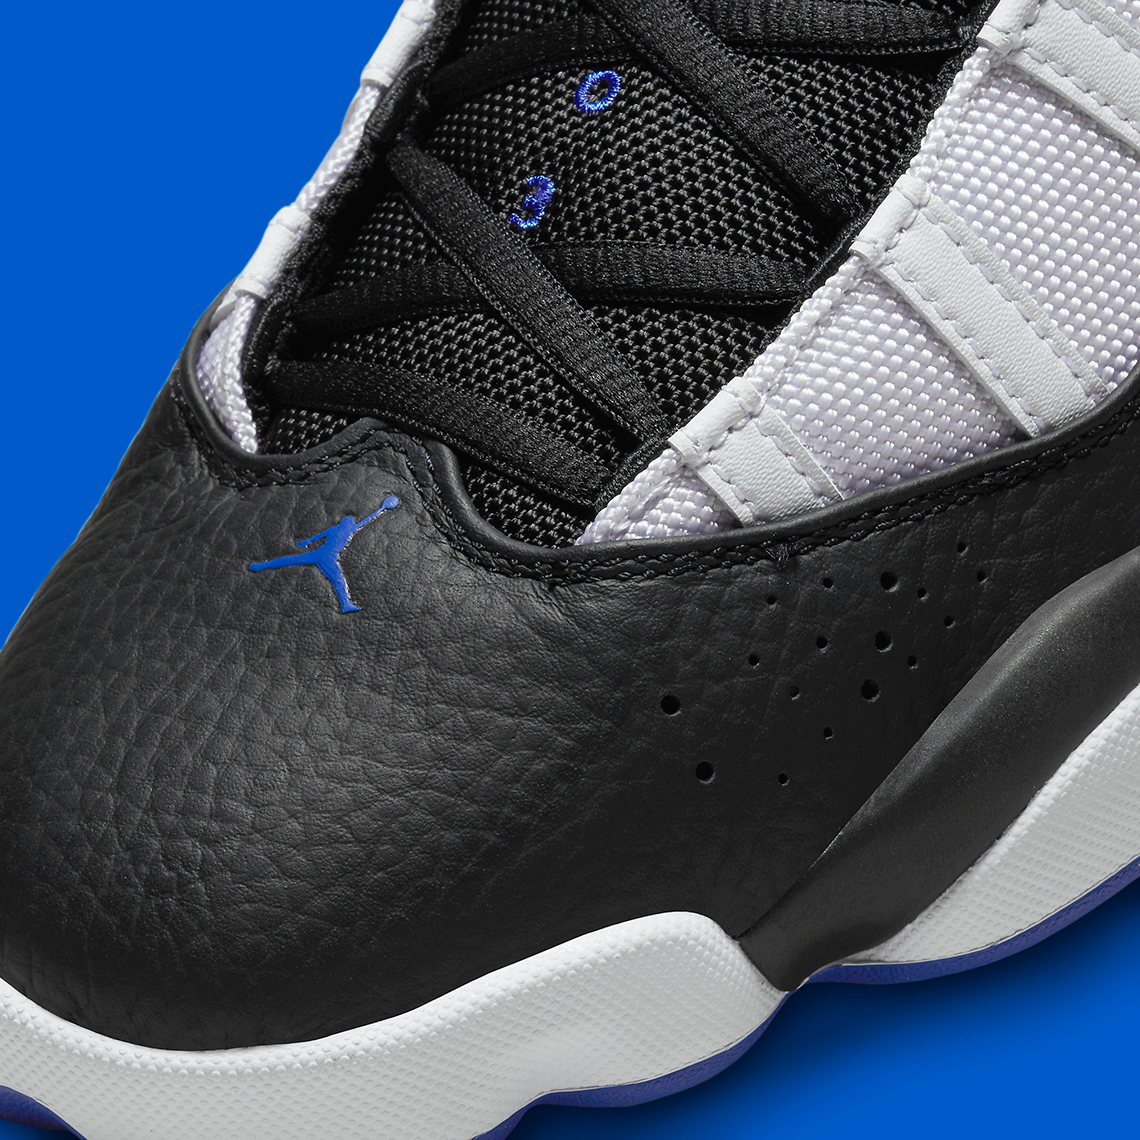 As Jordan Brand continues to expand on their upcoming Black White Game Royal 322992 142 2